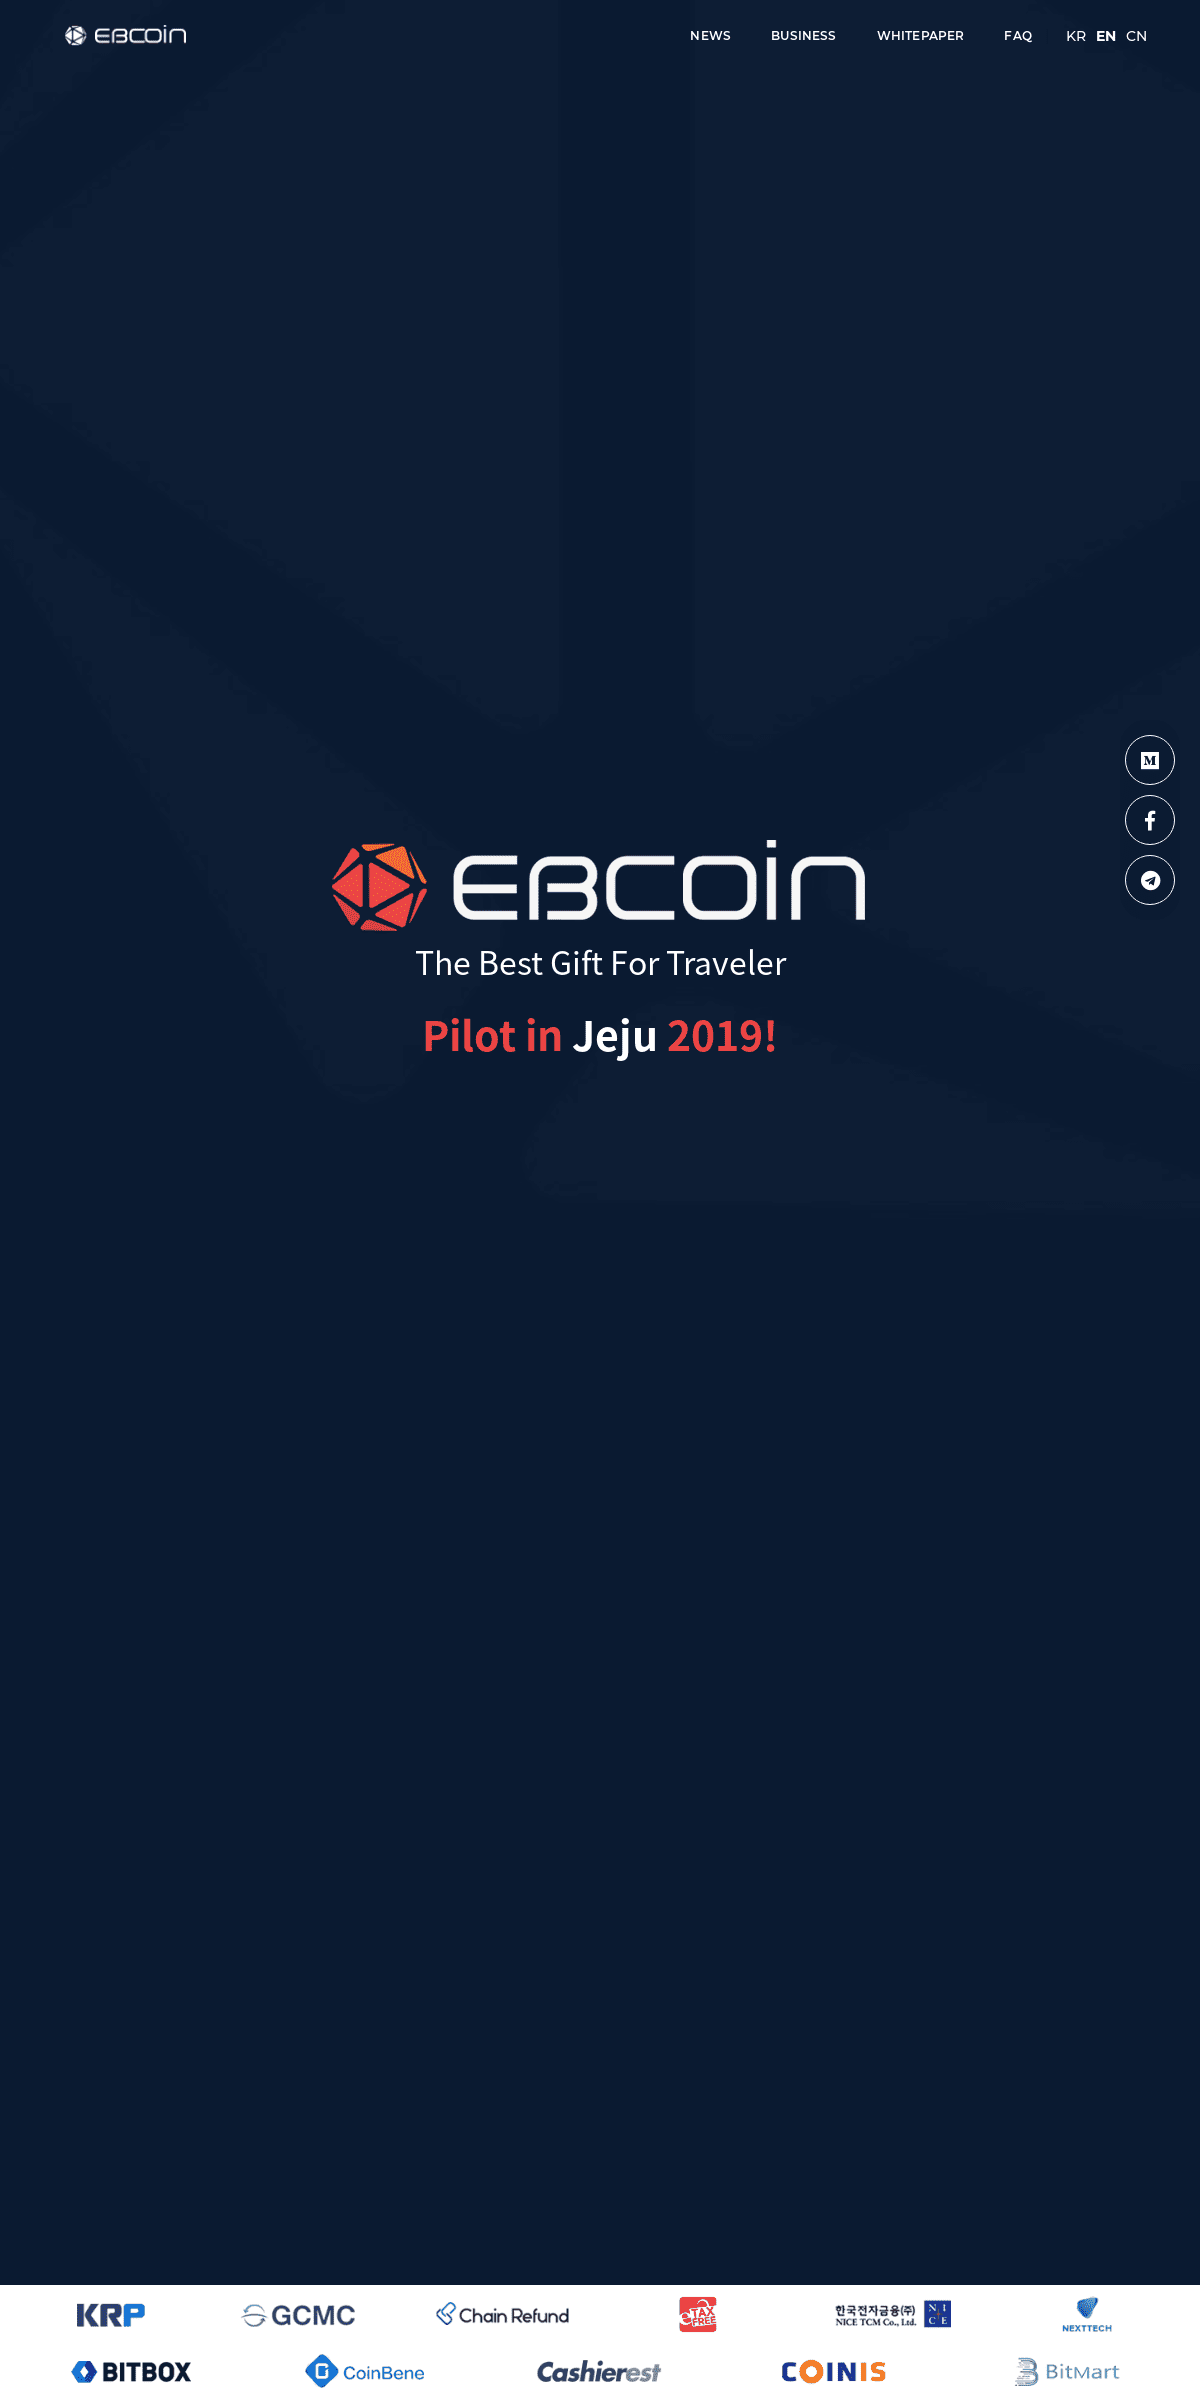 A complete backup of ebcoin.io